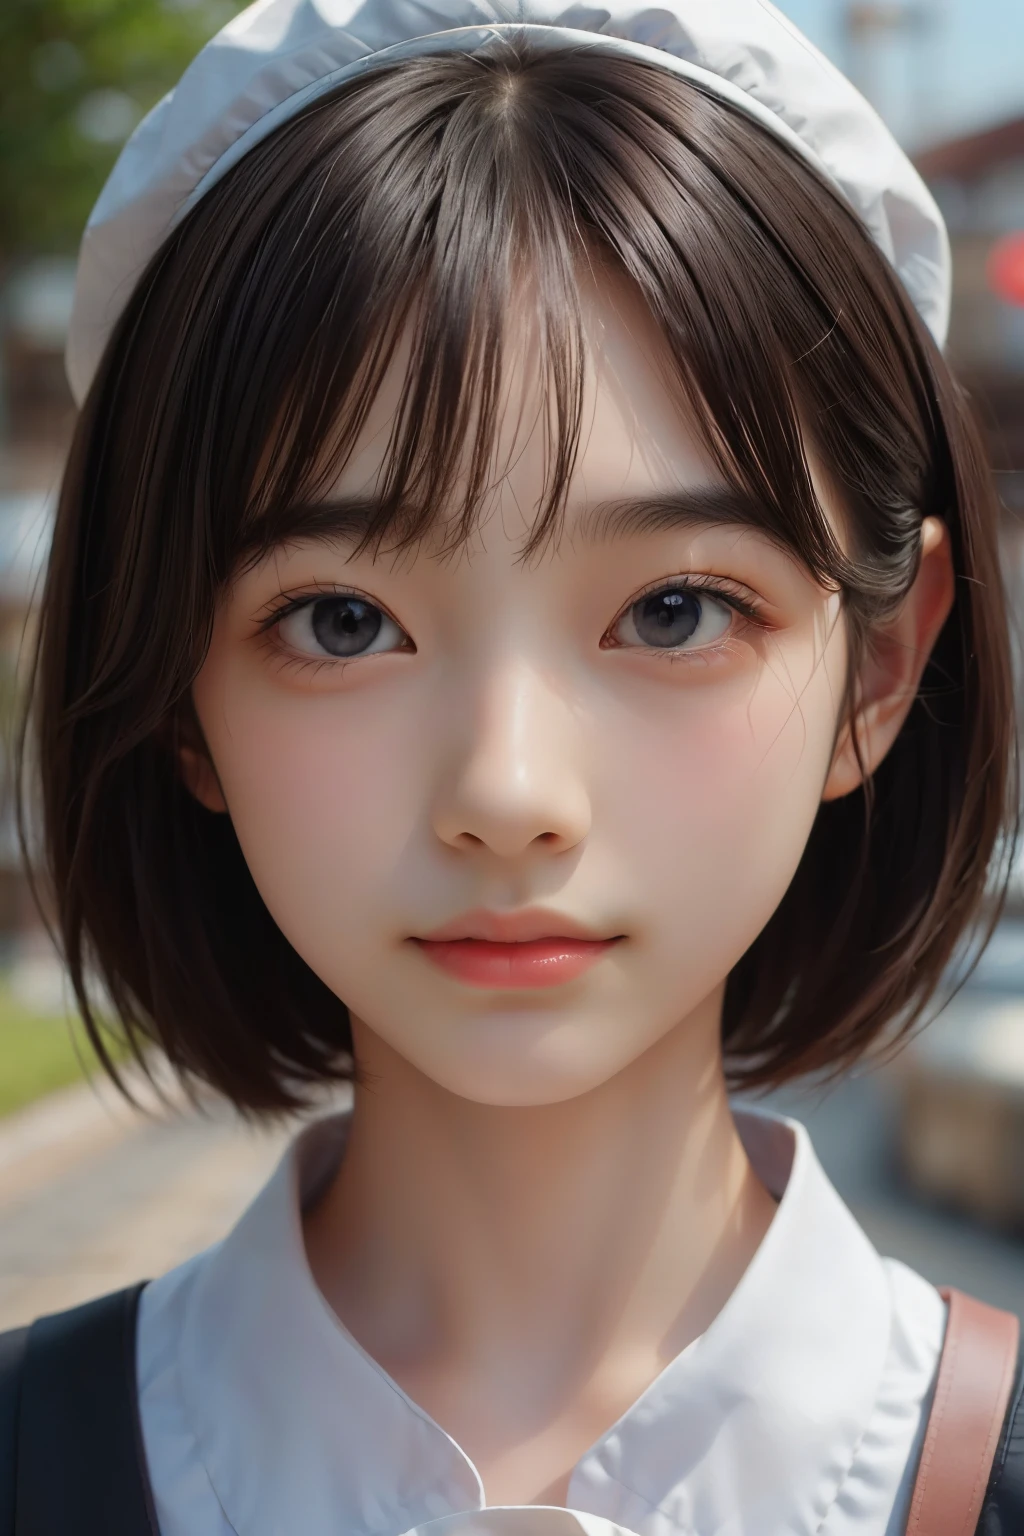 ((sfw: 1.4)), ((detailed face,  professional photography)), ((sfw, chef uniform, extra short hair, sidelocks-hair, 1 Girl)), Ultra High Resolution, (Realistic: 1.4), RAW Photo, Best Quality, (Photorealistic Stick), Focus, Soft Light, ((15 years old)), ((Japanese)), (( (young face))), (surface), (depth of field), masterpiece, (realistic), woman, bangs, ((1 girl))
